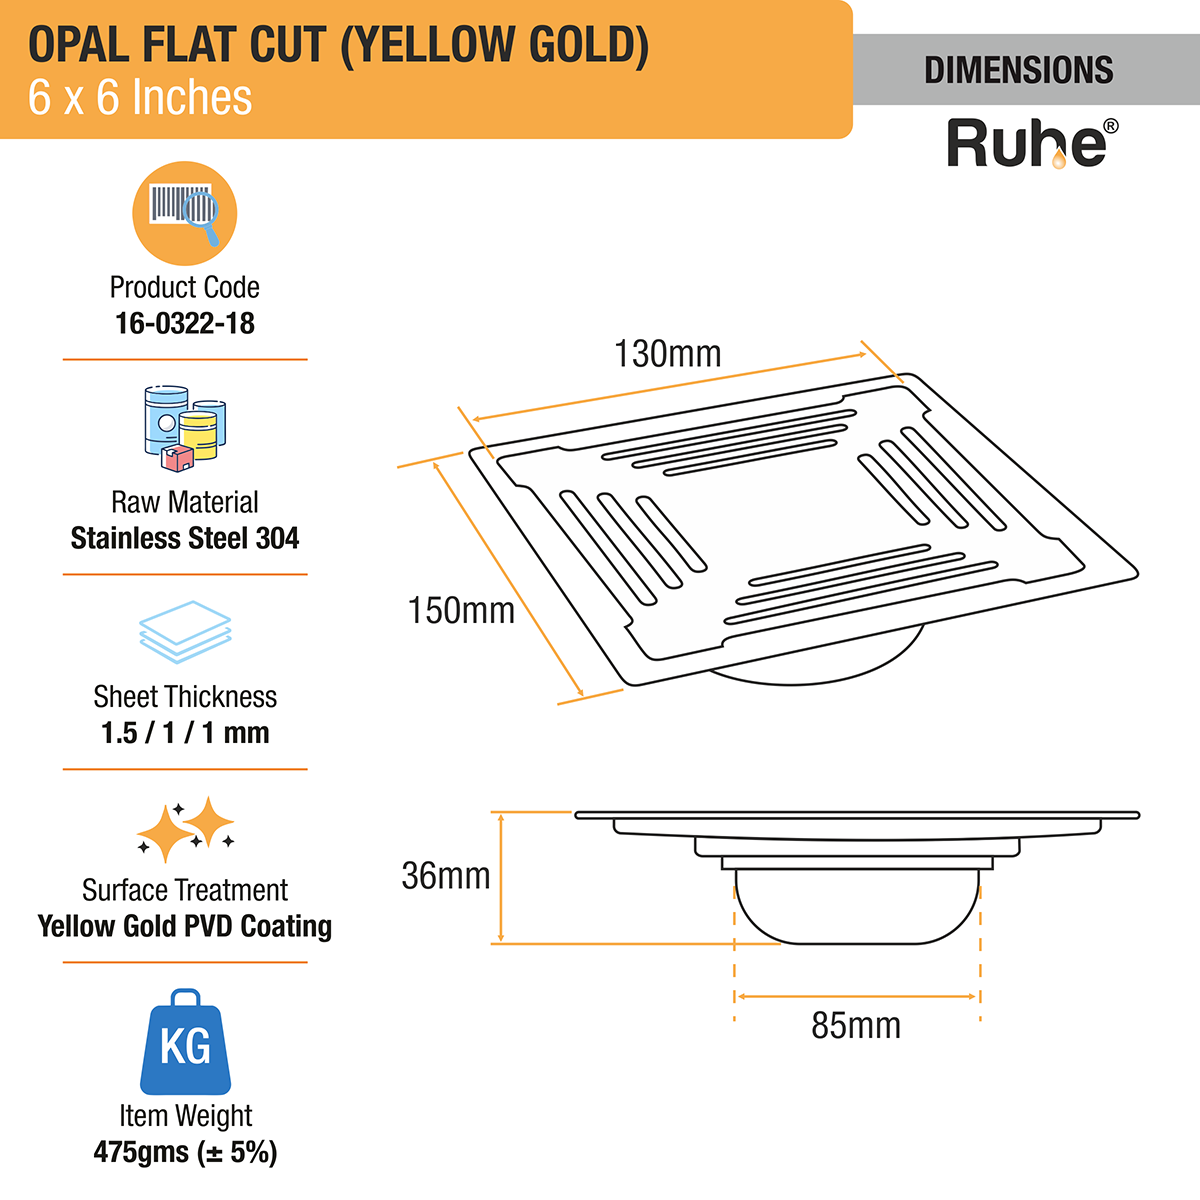 Opal Square Flat Cut Floor Drain in Yellow Gold PVD Coating (6 x 6 Inches) dimensions and sizes